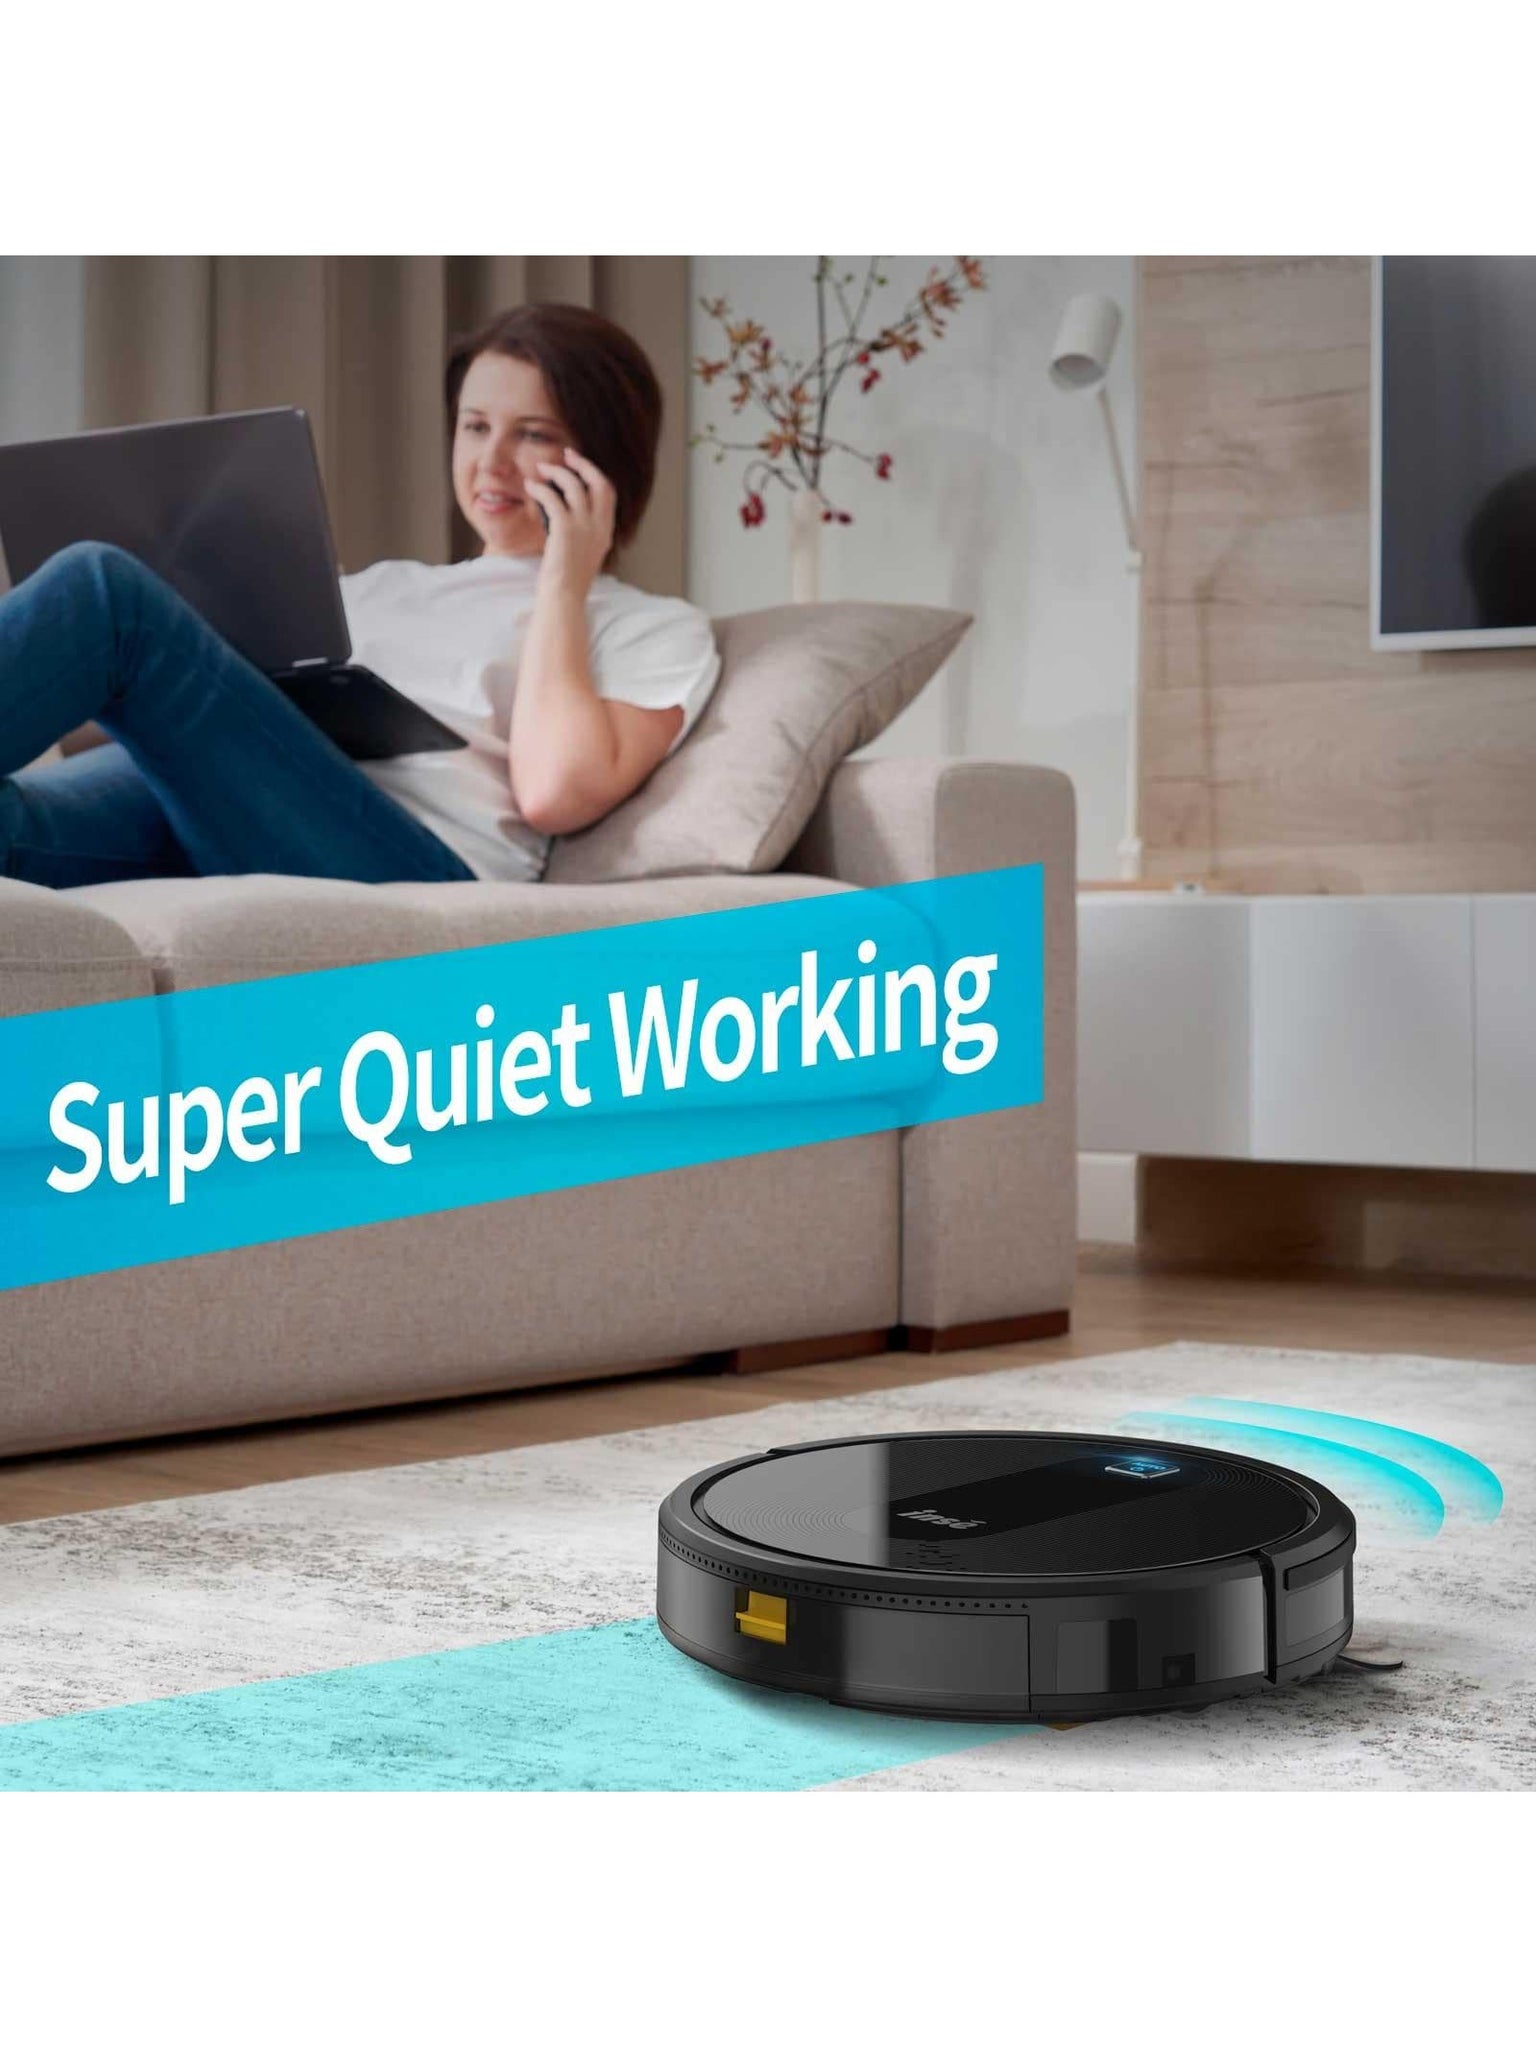 INSE Robot Vacuum Cleaner 2000Pa Powerful Suction, Super Slim Quiet, 120min Runtime, Self Charging, Large Dustbin, Daily Schedule Smart Robotic Vacuum